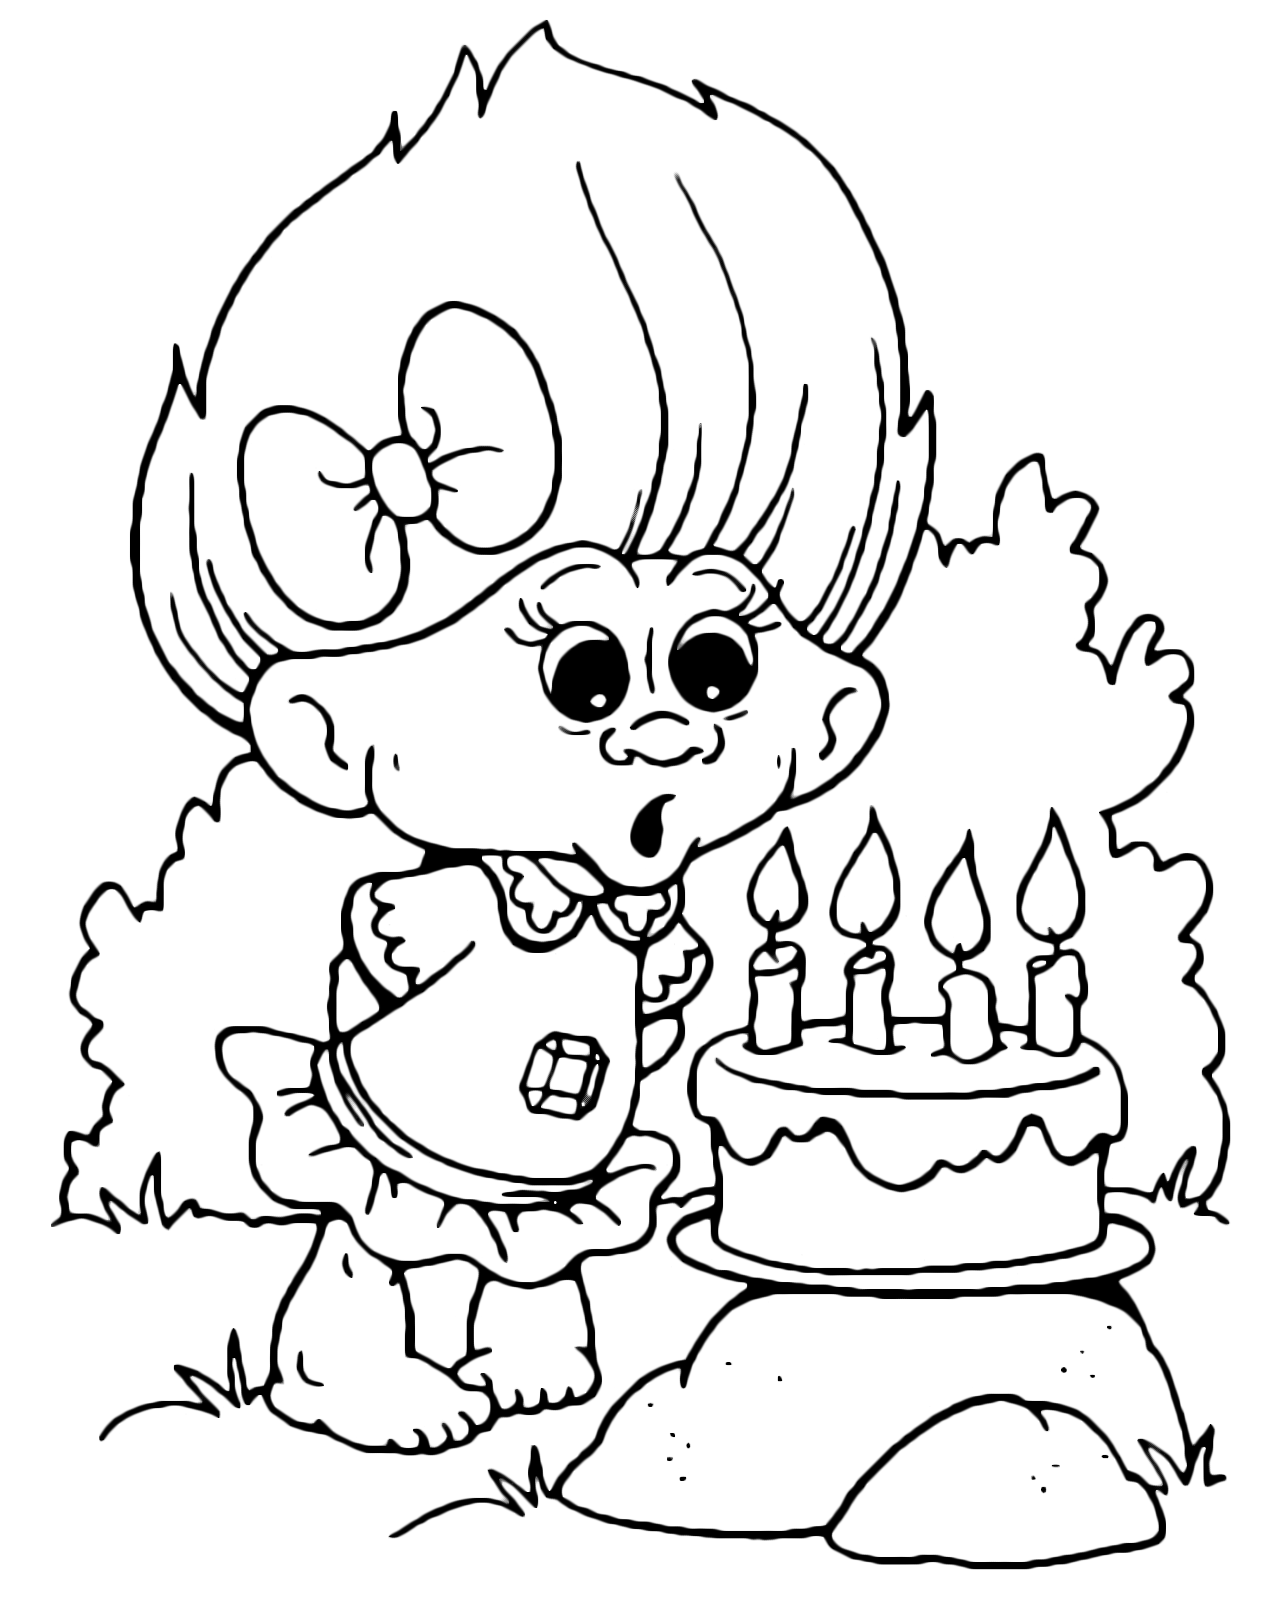 Trolls - A small Troll blows on its four candles